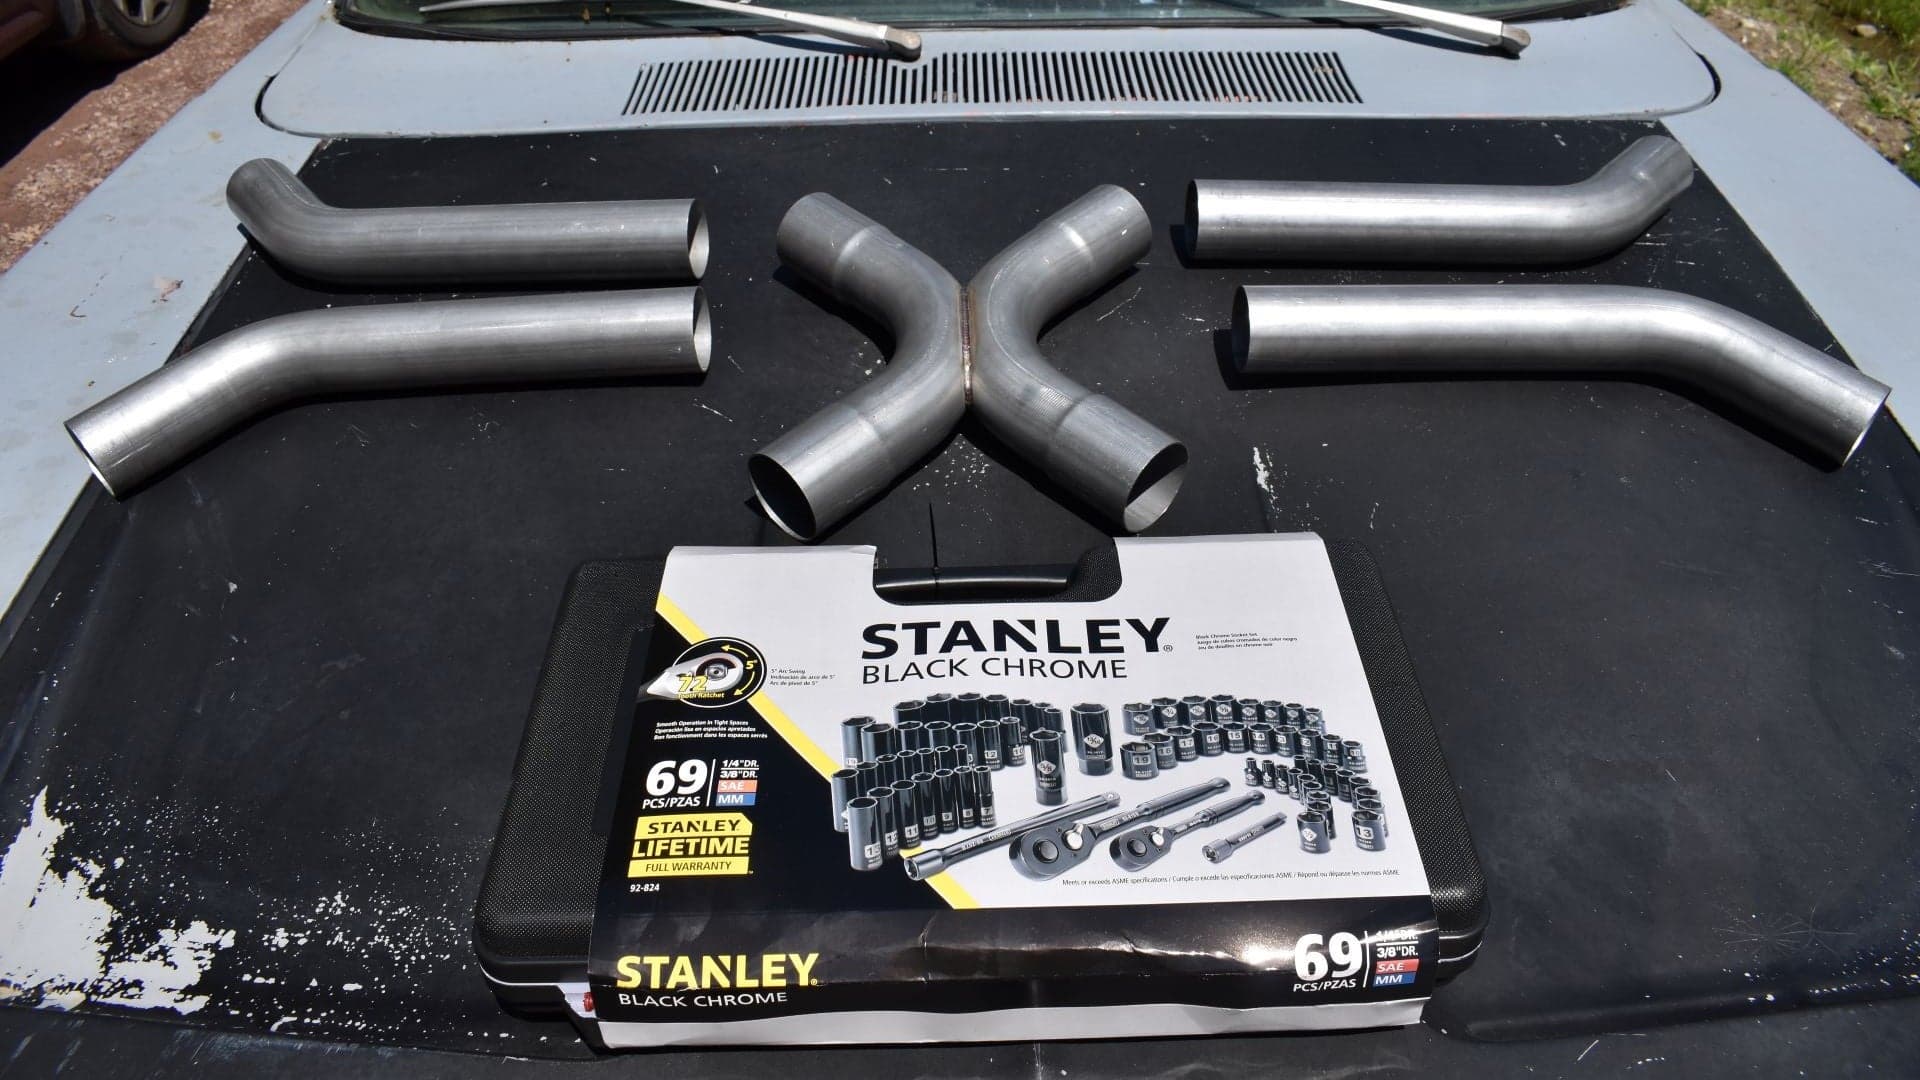 What You Need To Know About the Stanley Black Chrome Tool Set